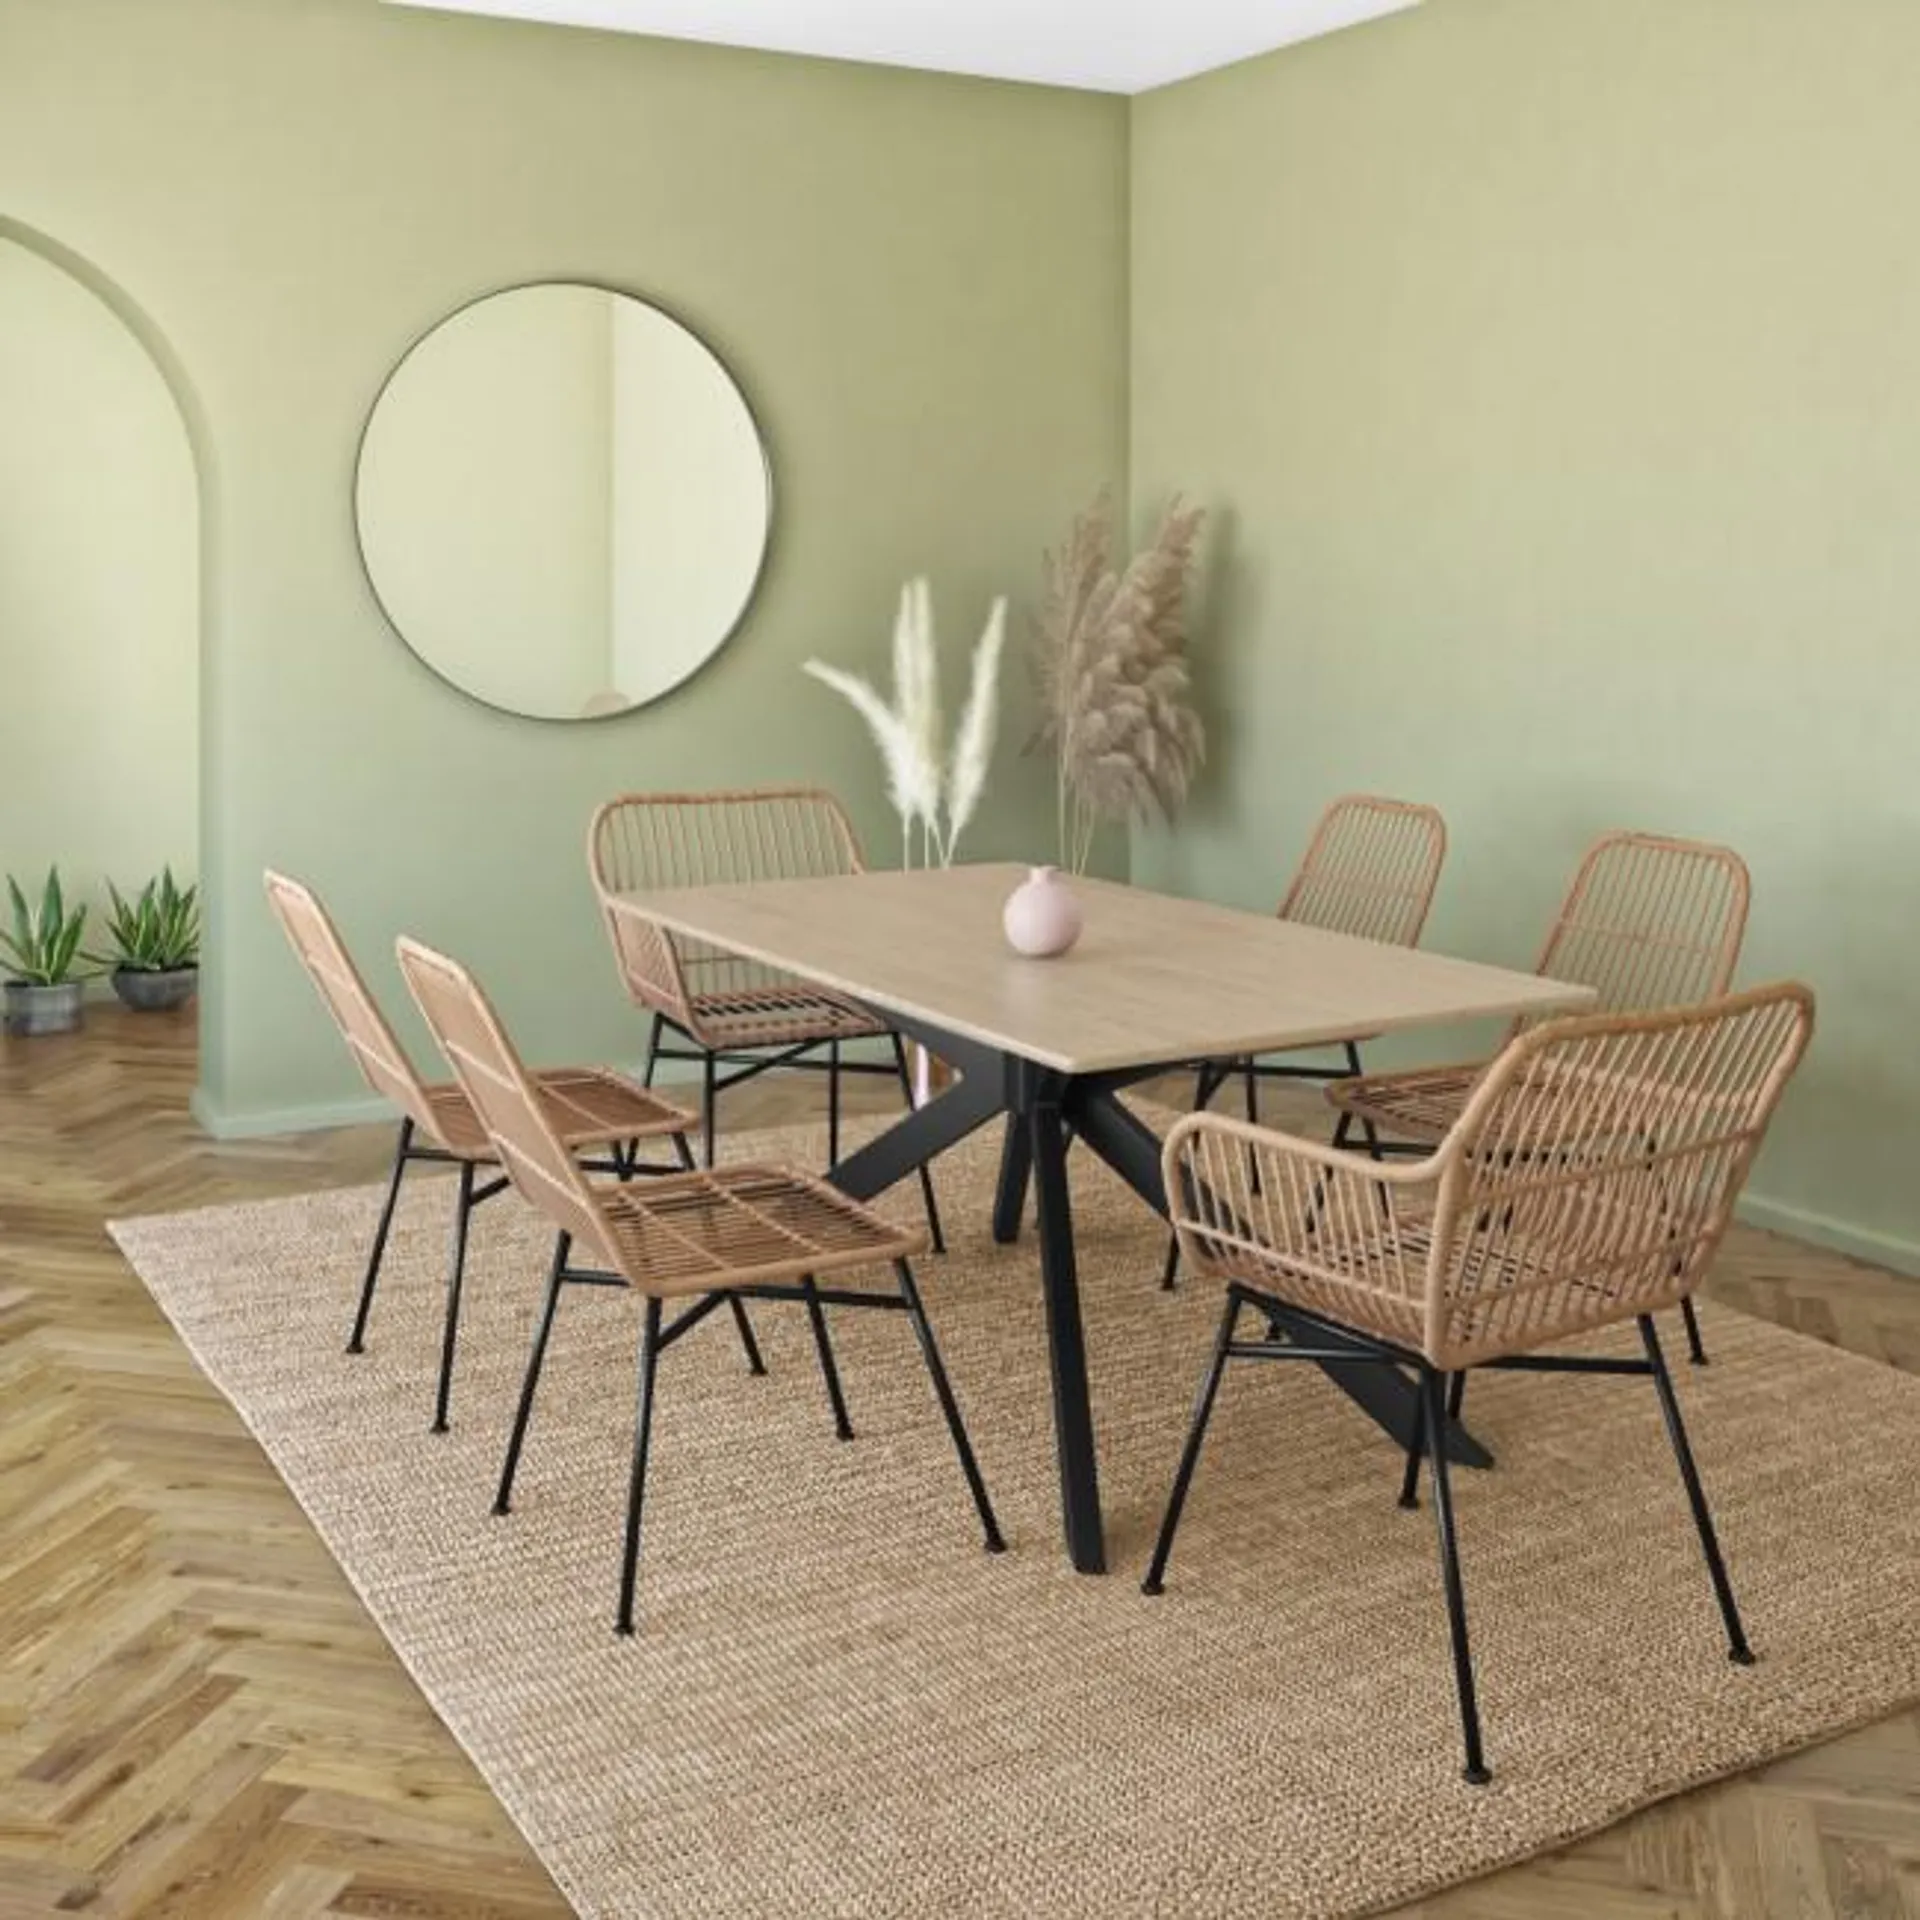 Light Oak Dining Table with 6 Brown Rattan Dining Chairs - Carson